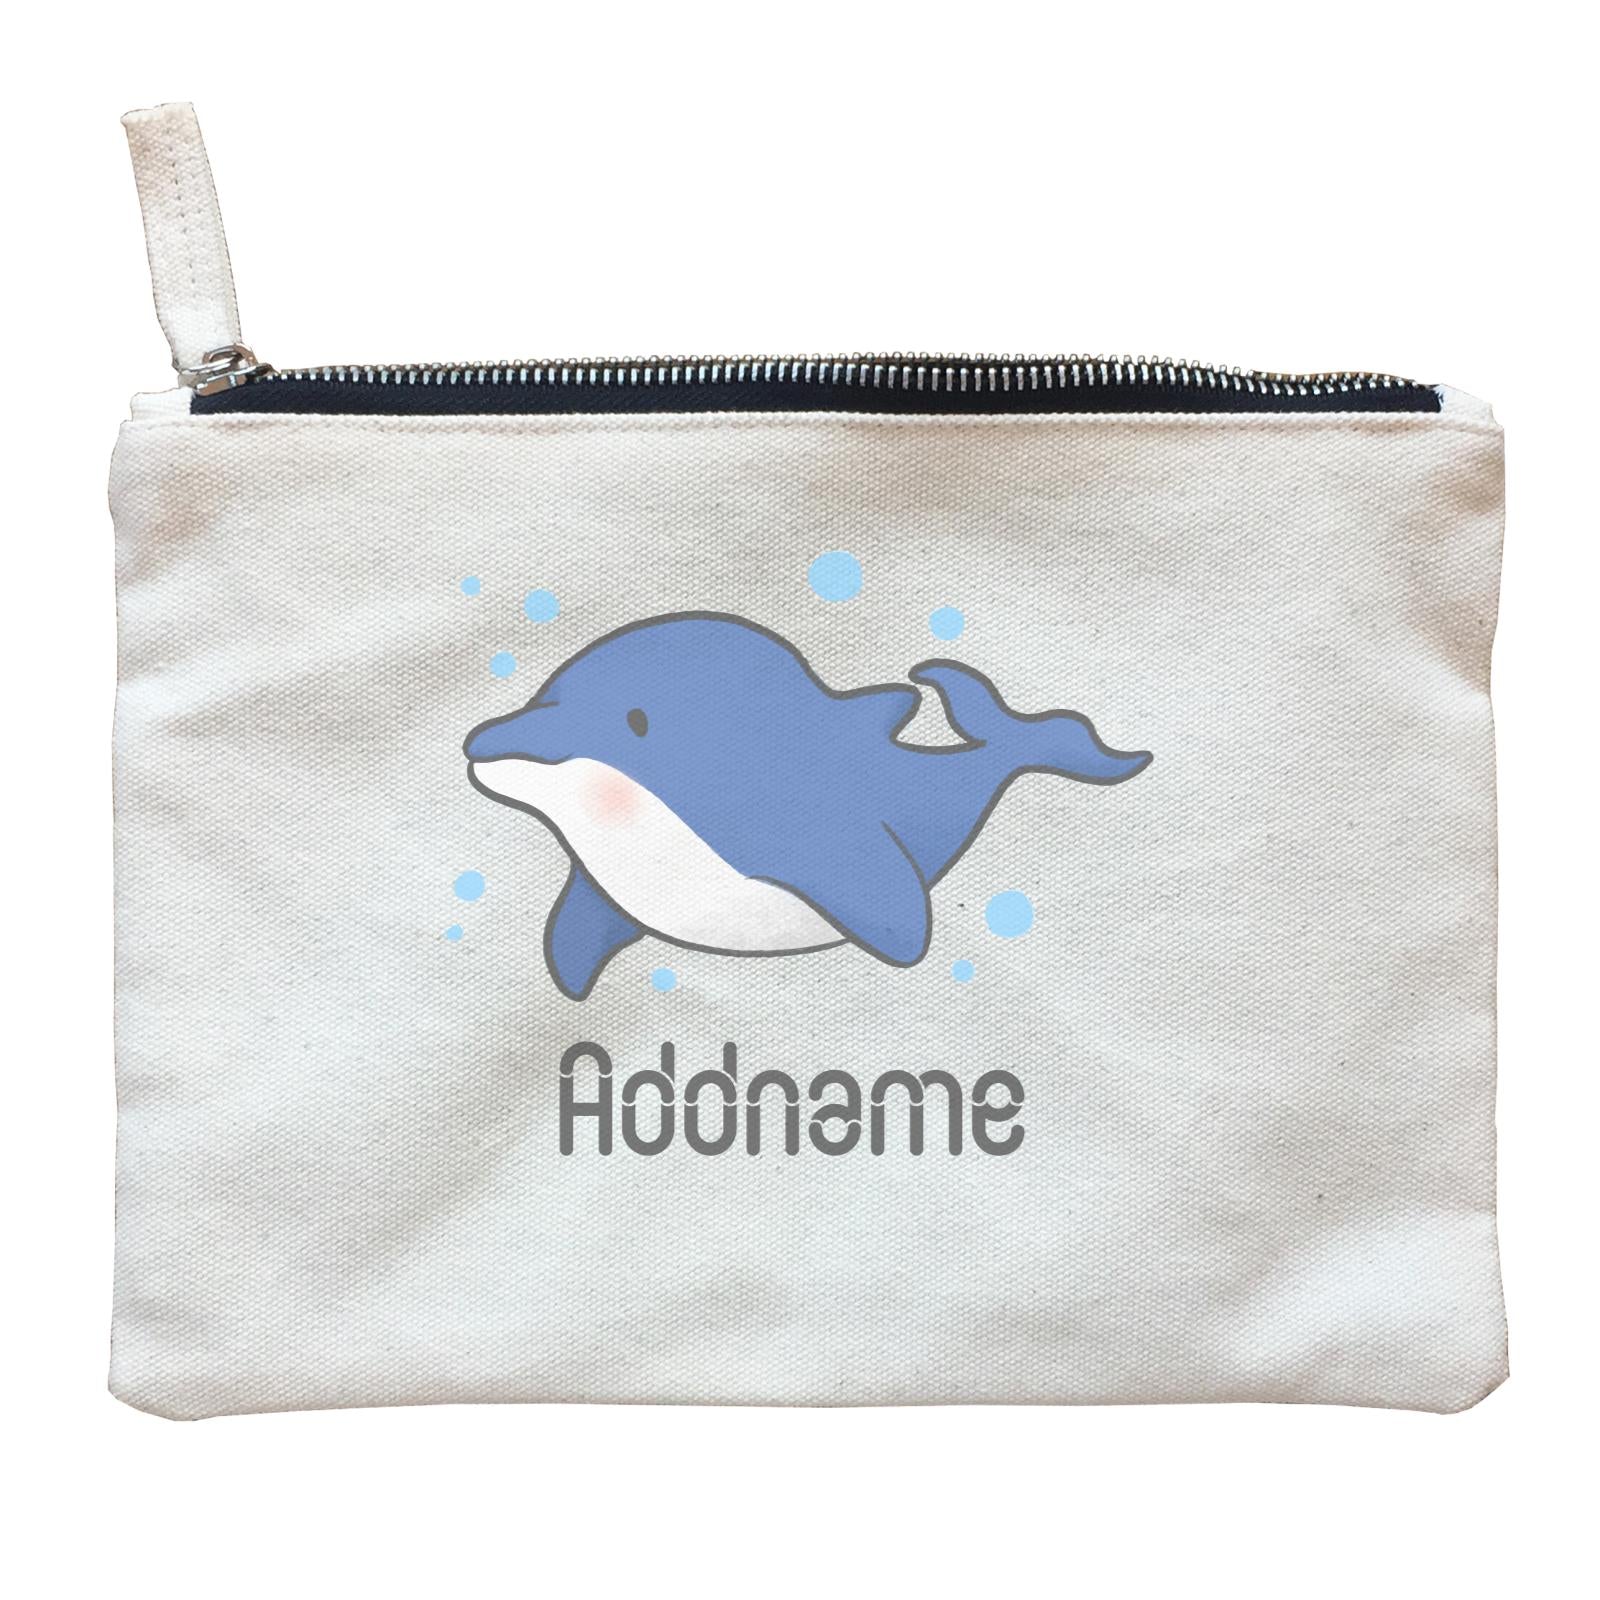 Cute Hand Drawn Style Dolphin Addname Zipper Pouch